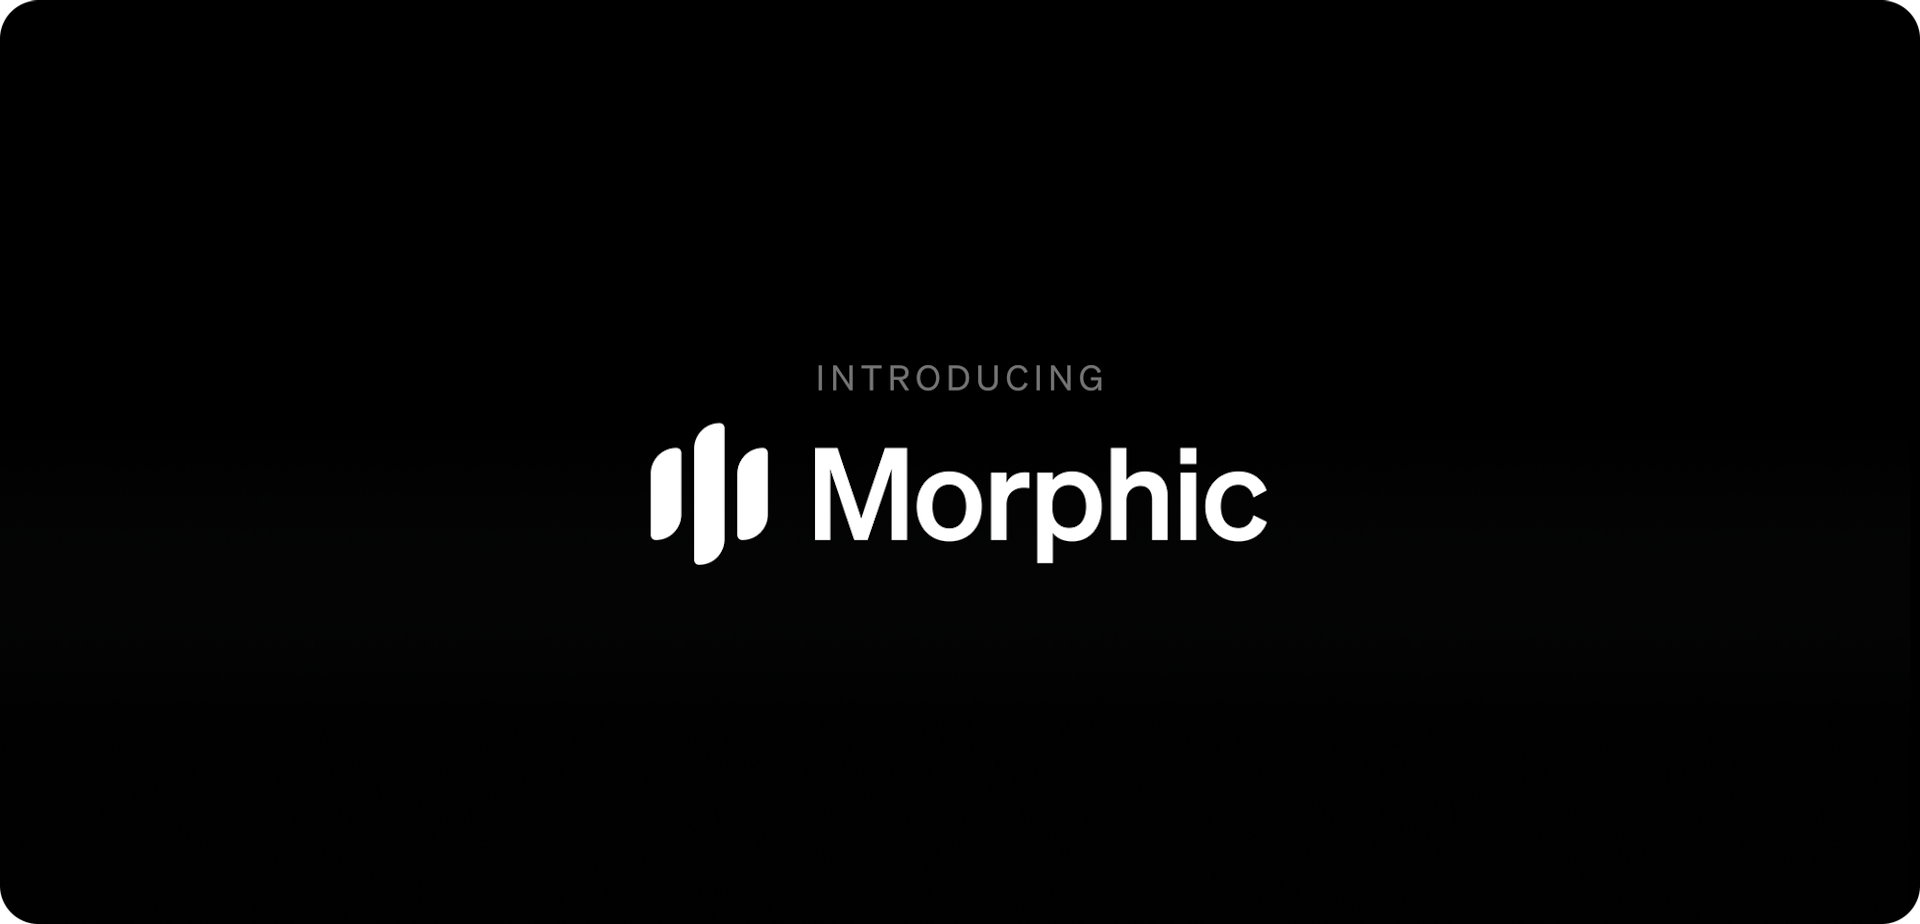 Announcing Morphic. Welcome to the future of storytelling.